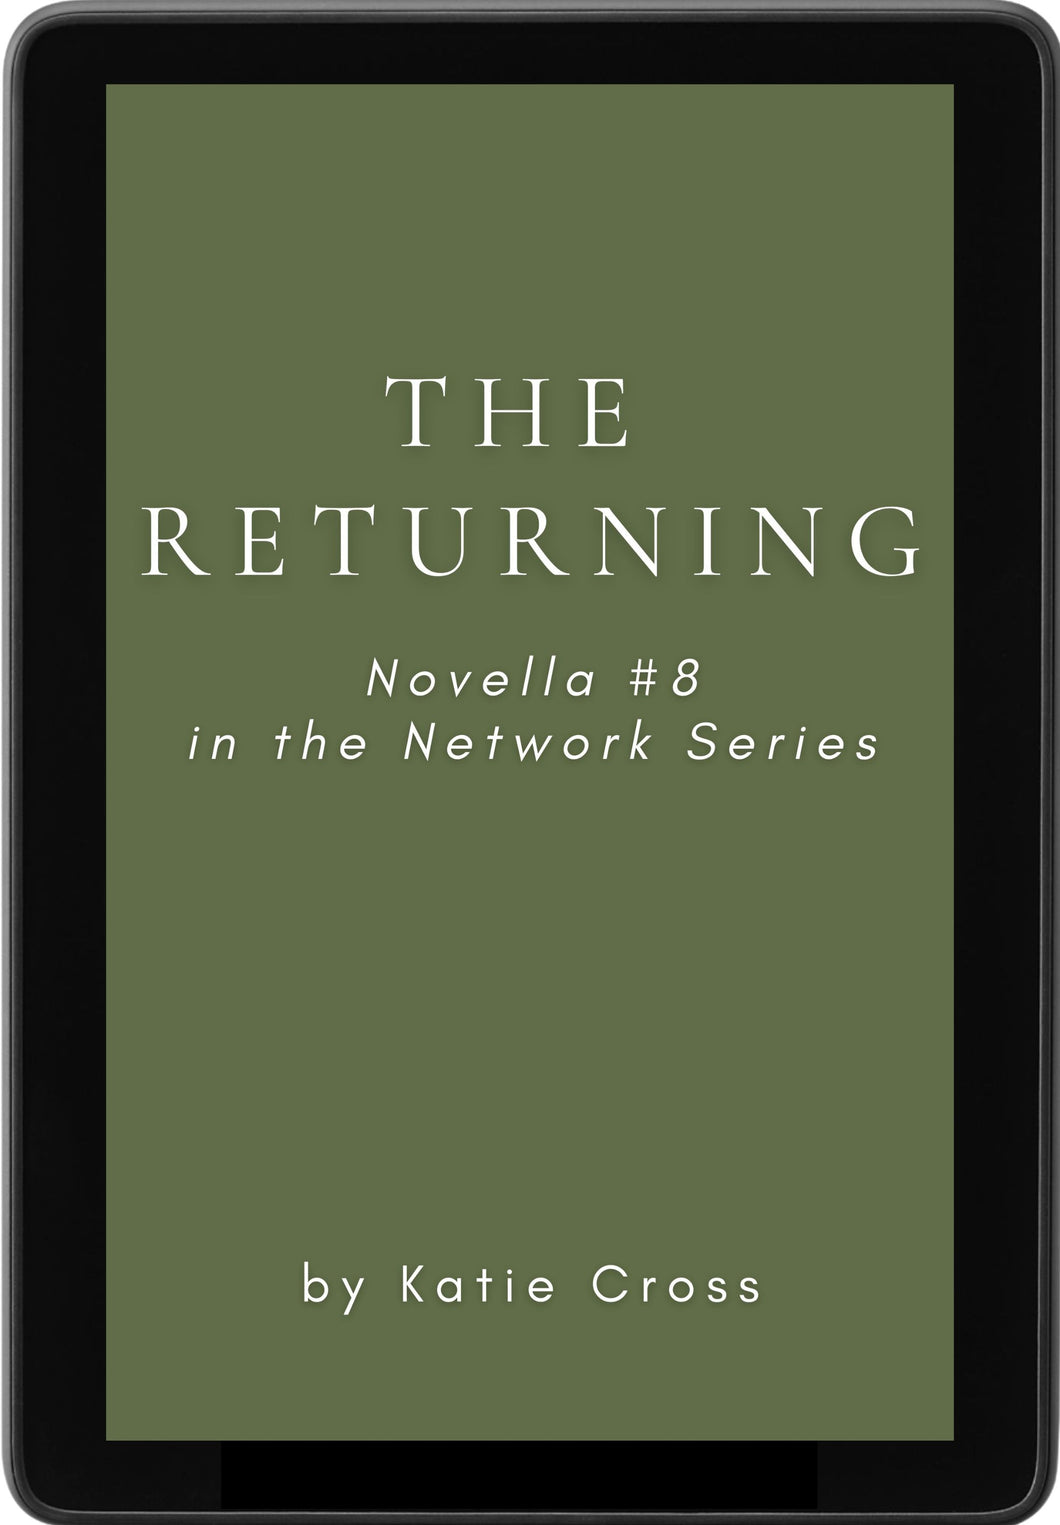 The Returning (Novella #8 in the Network Series)